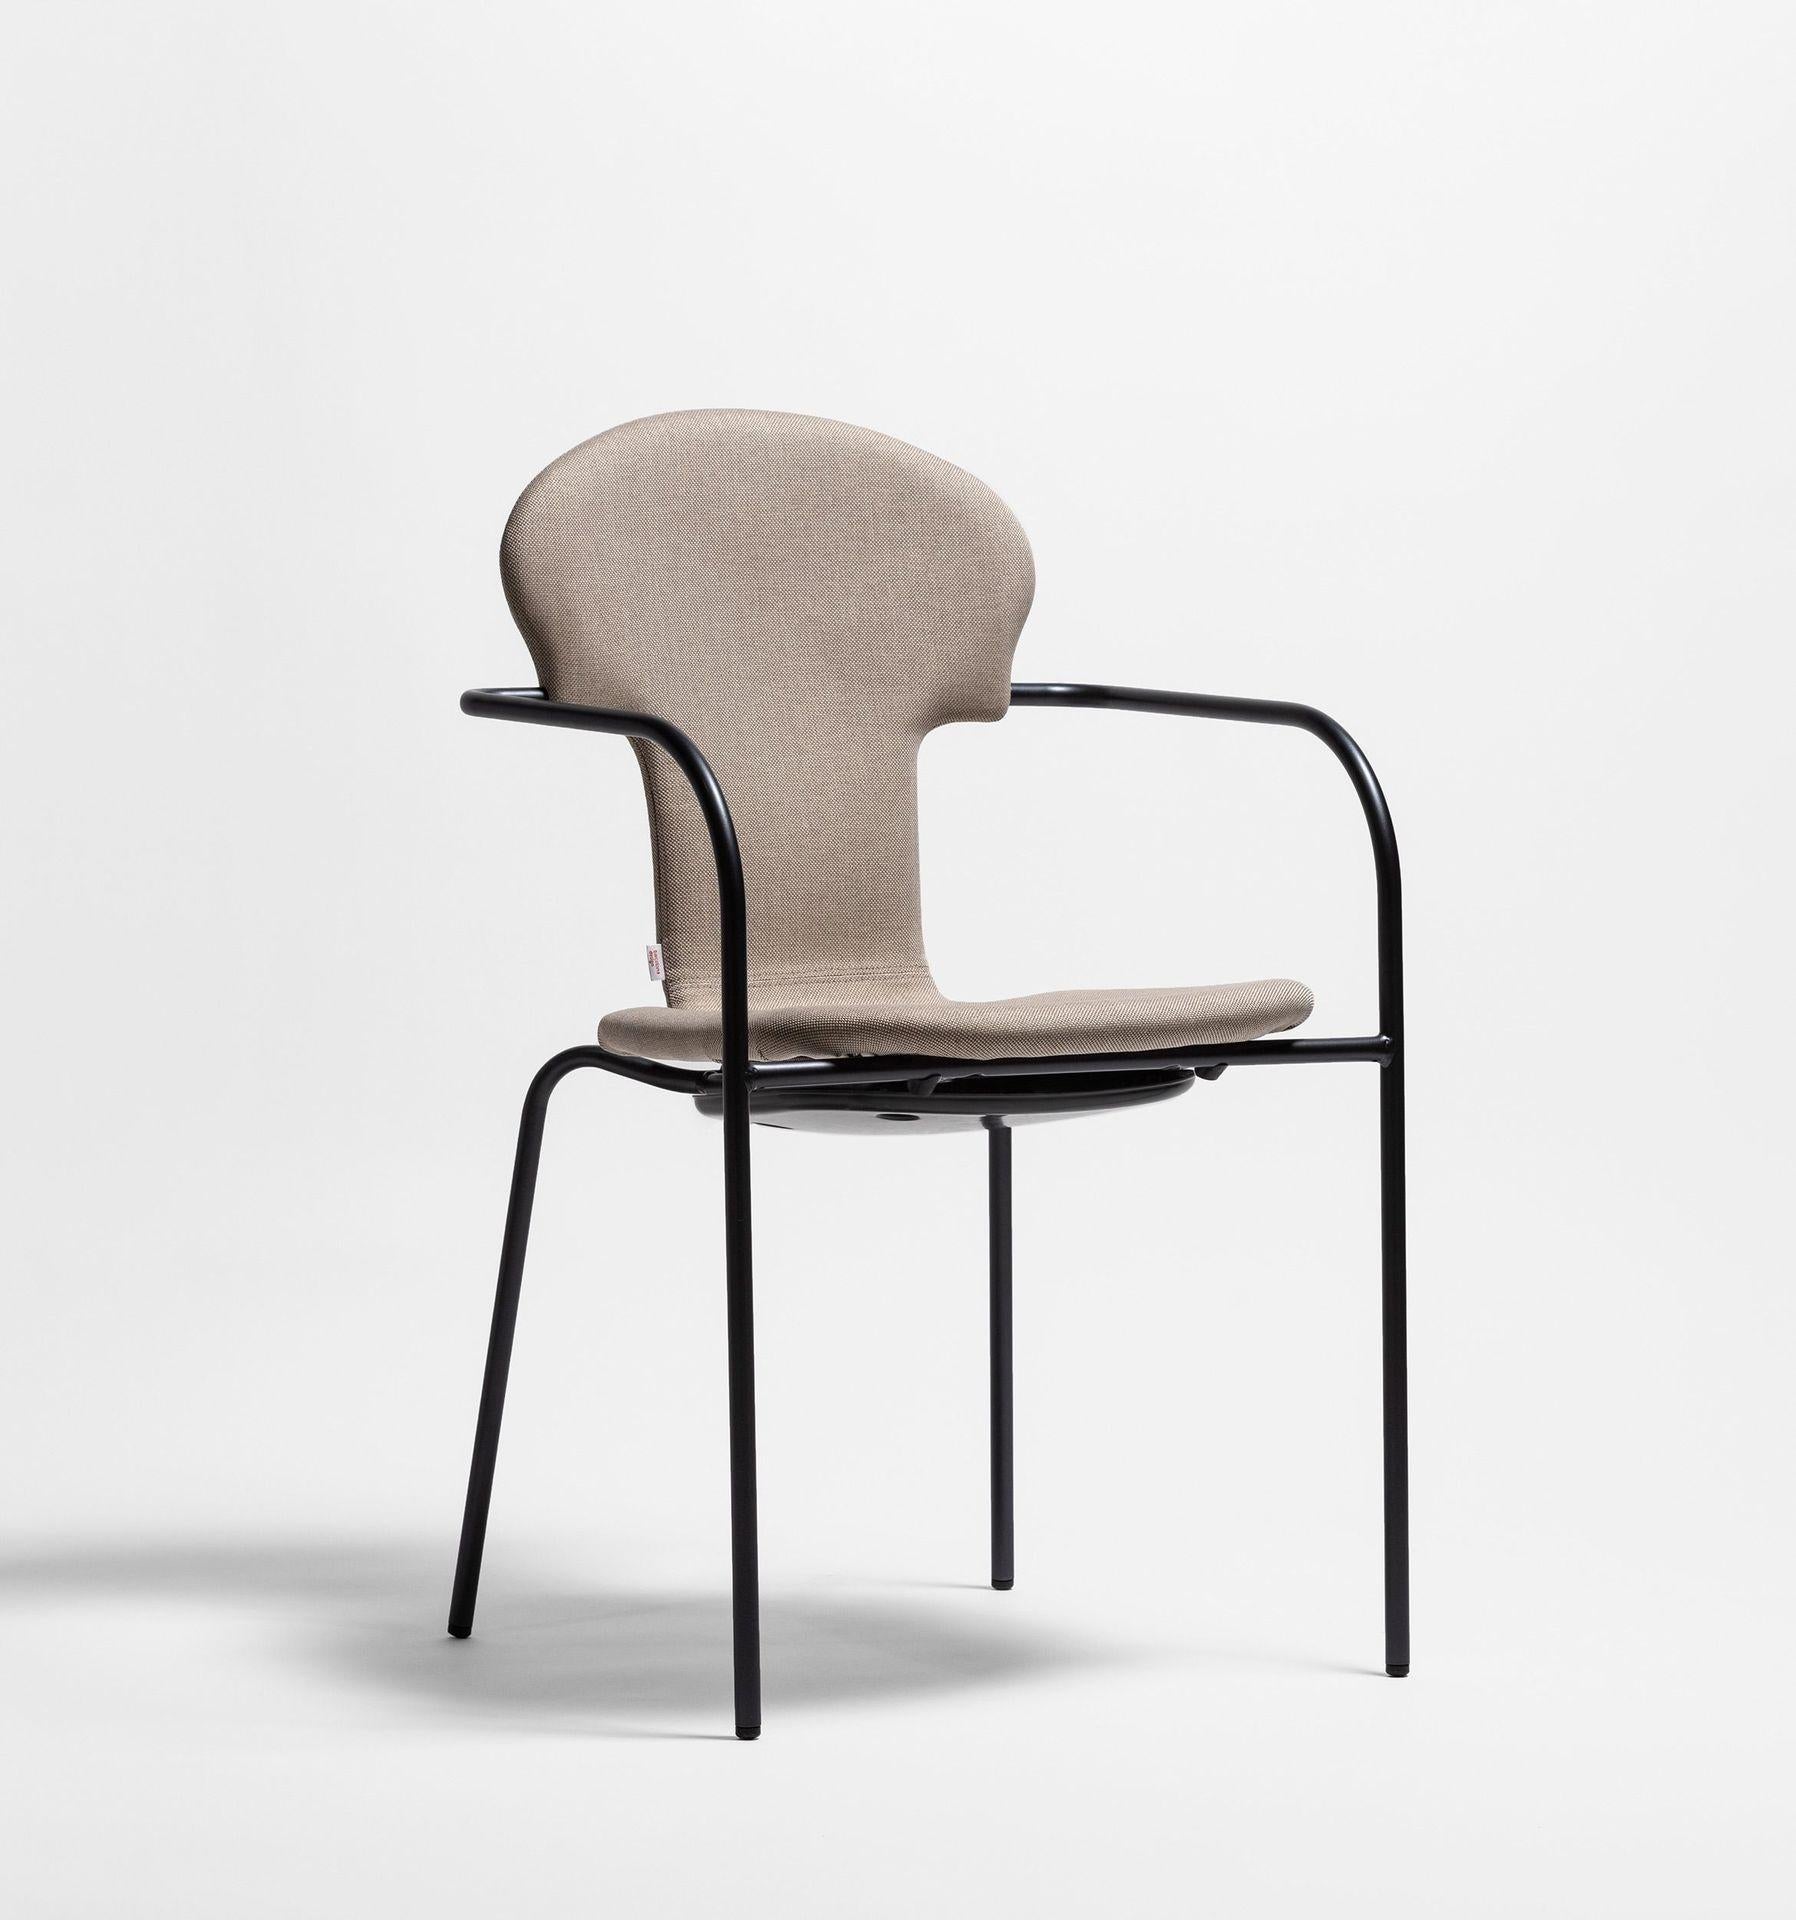 Minivarius brown chair by Oscar Tusquets
Dimensions: D 53 x W 52 x H 82 cm 
Materials: Structure in tubular steel painted in anodic black. A one-piece seat in gas injected polypropylene in black or white. Also available in an upholstered
version